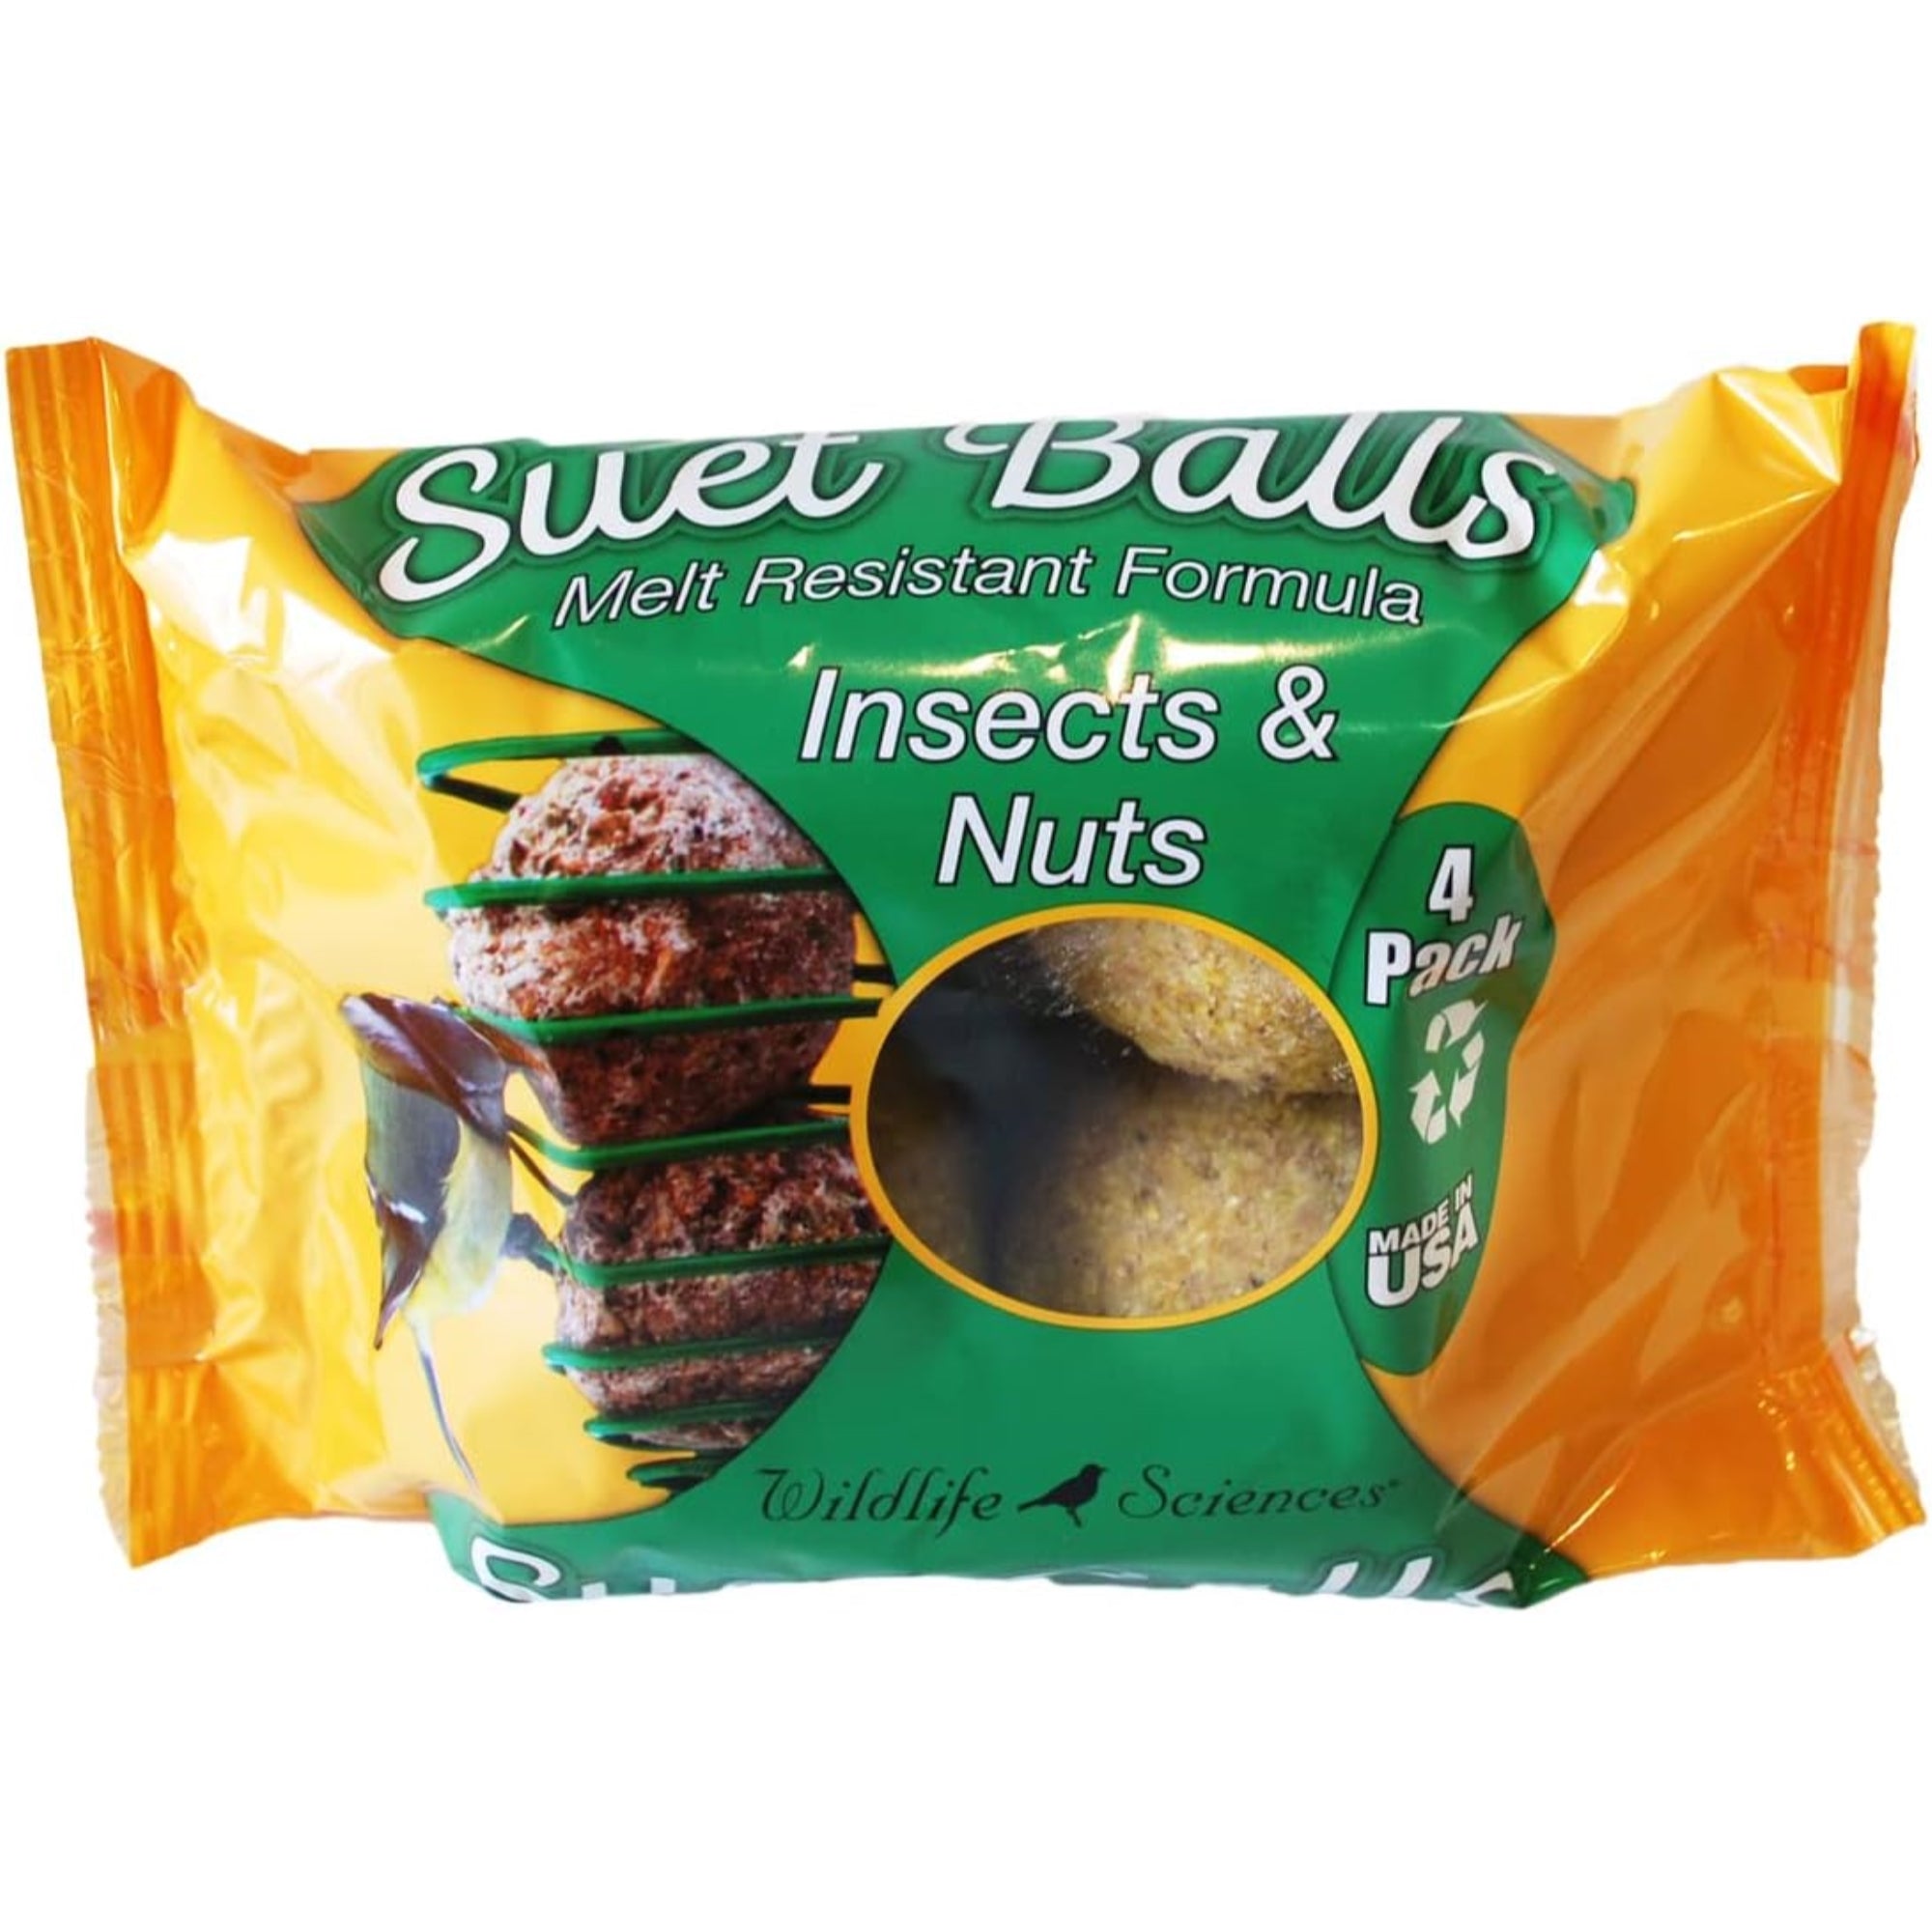 Wildlife Sciences Insects & Nuts Suet Balls For Wild Birds, Melt Resistant Formula (4 Per Pack)